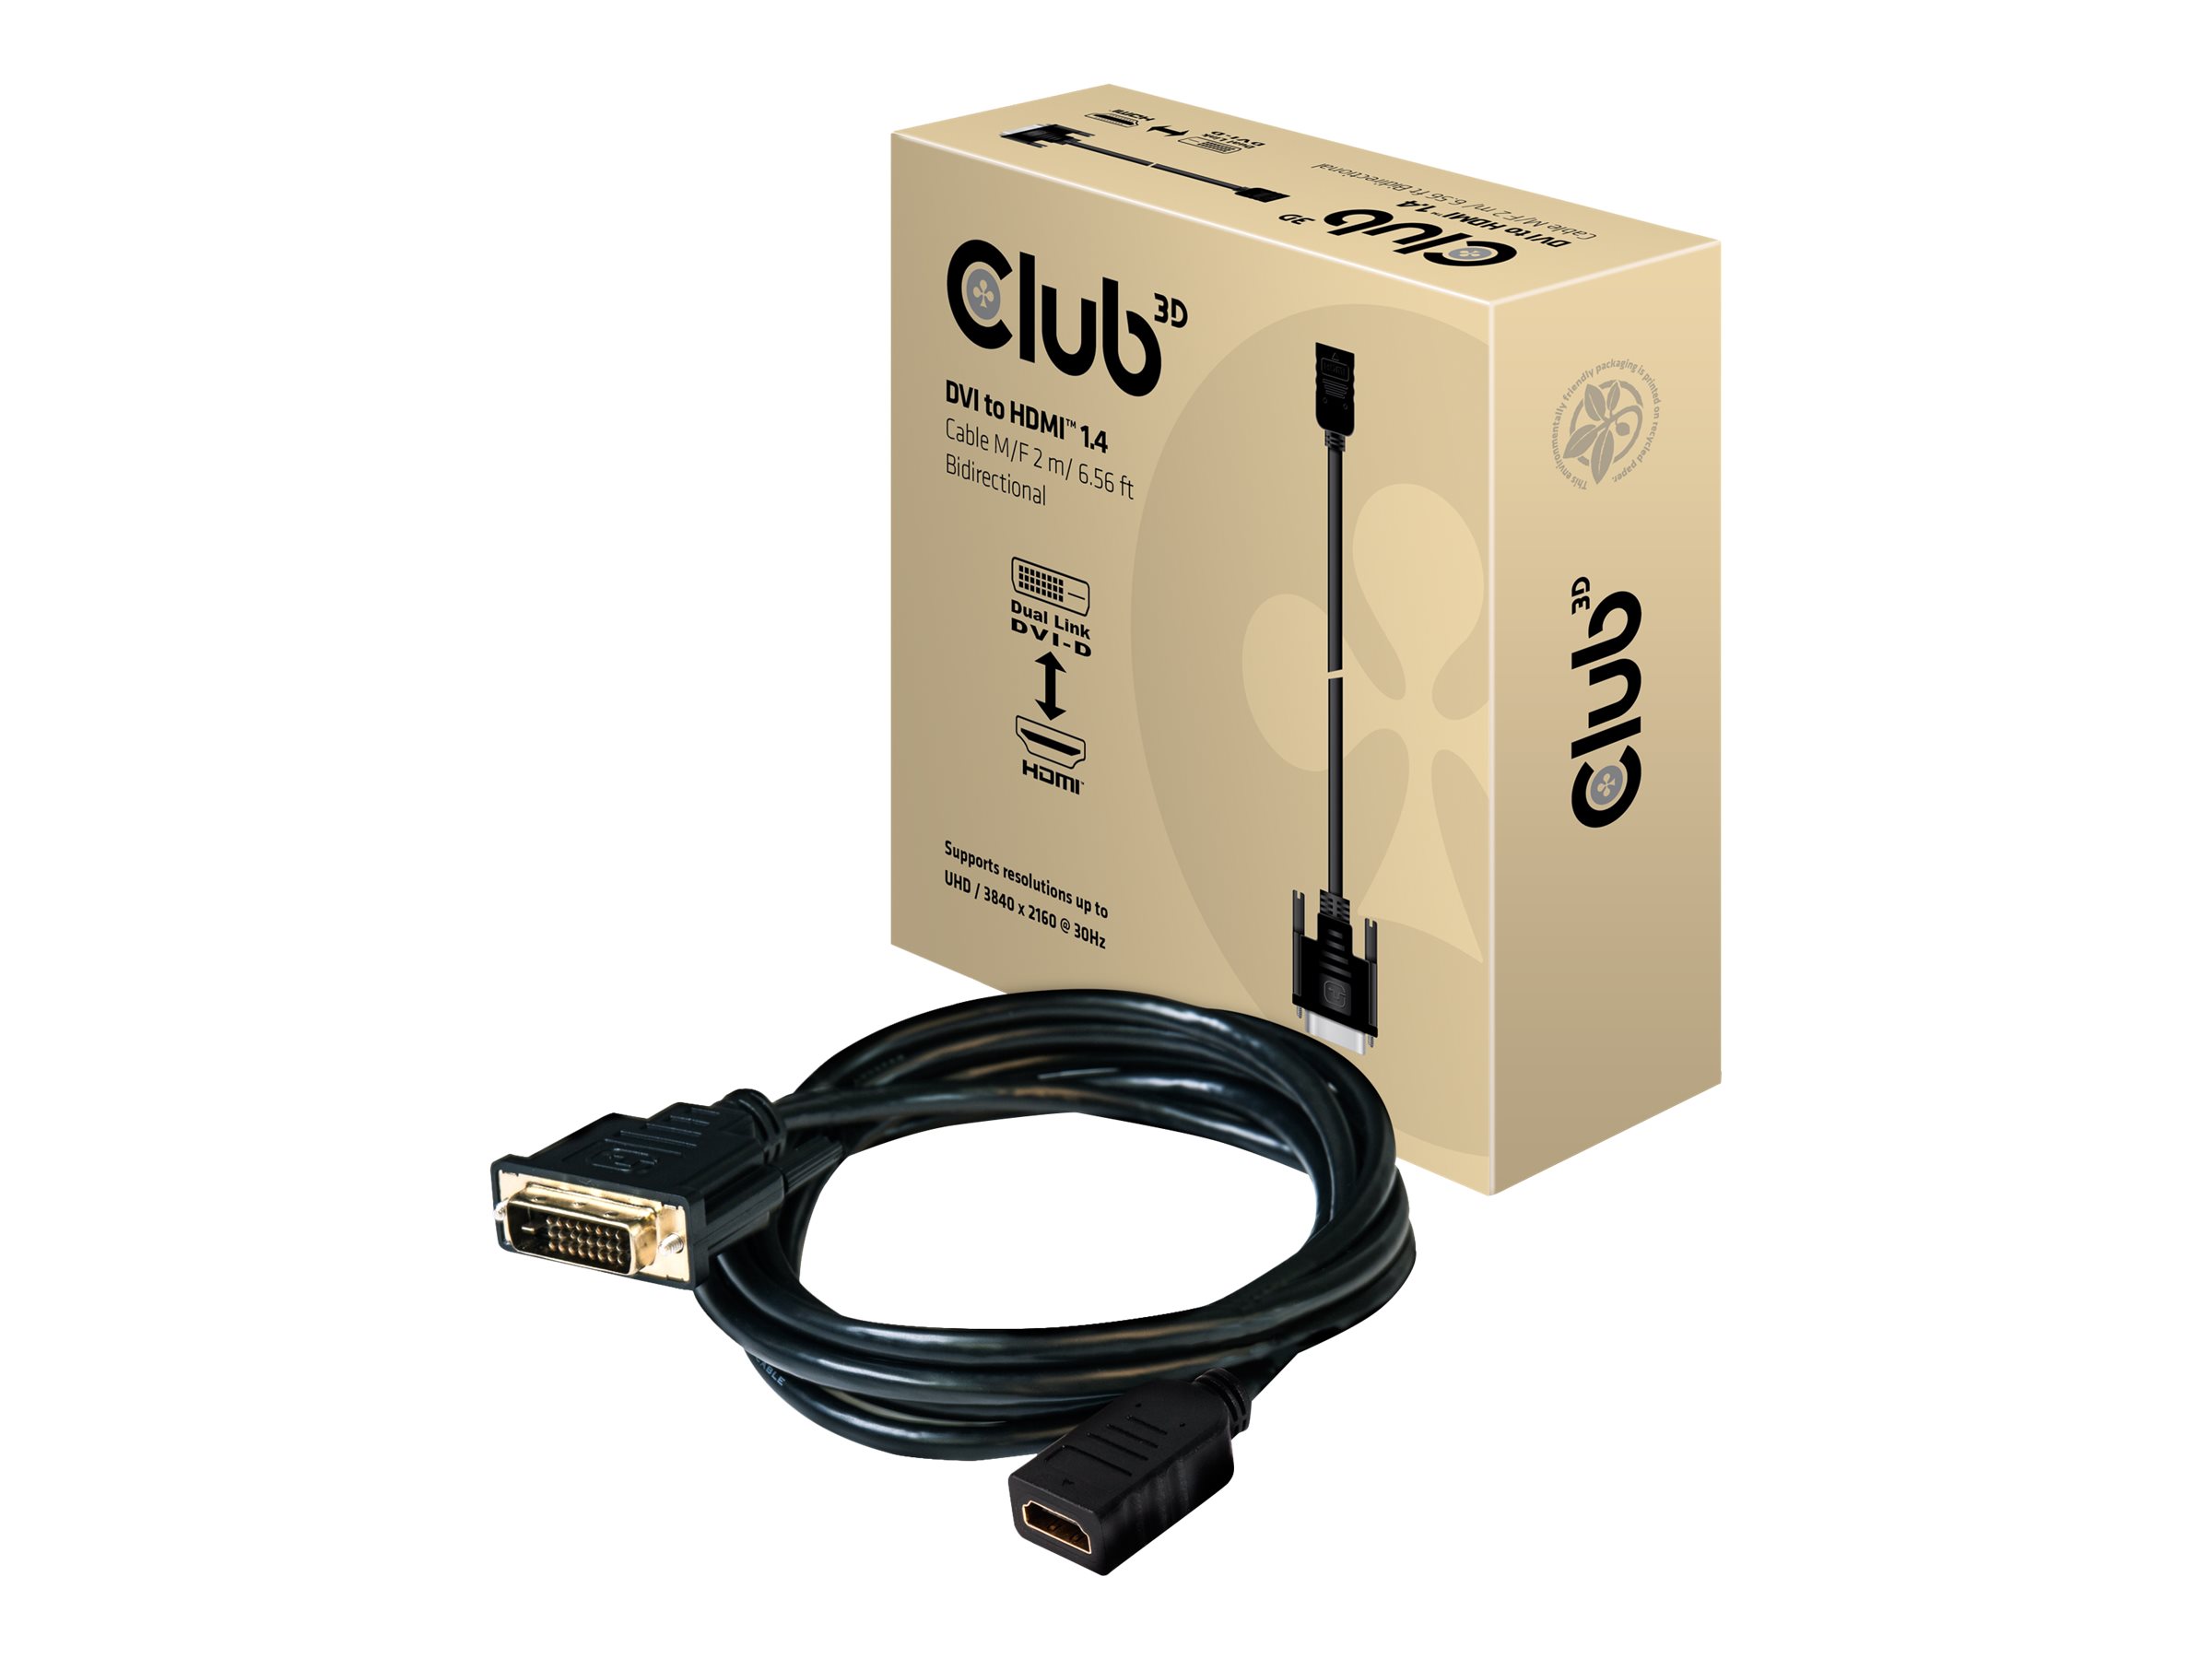 Club 3D CAC-1211 - Adapter cable - Dual Link